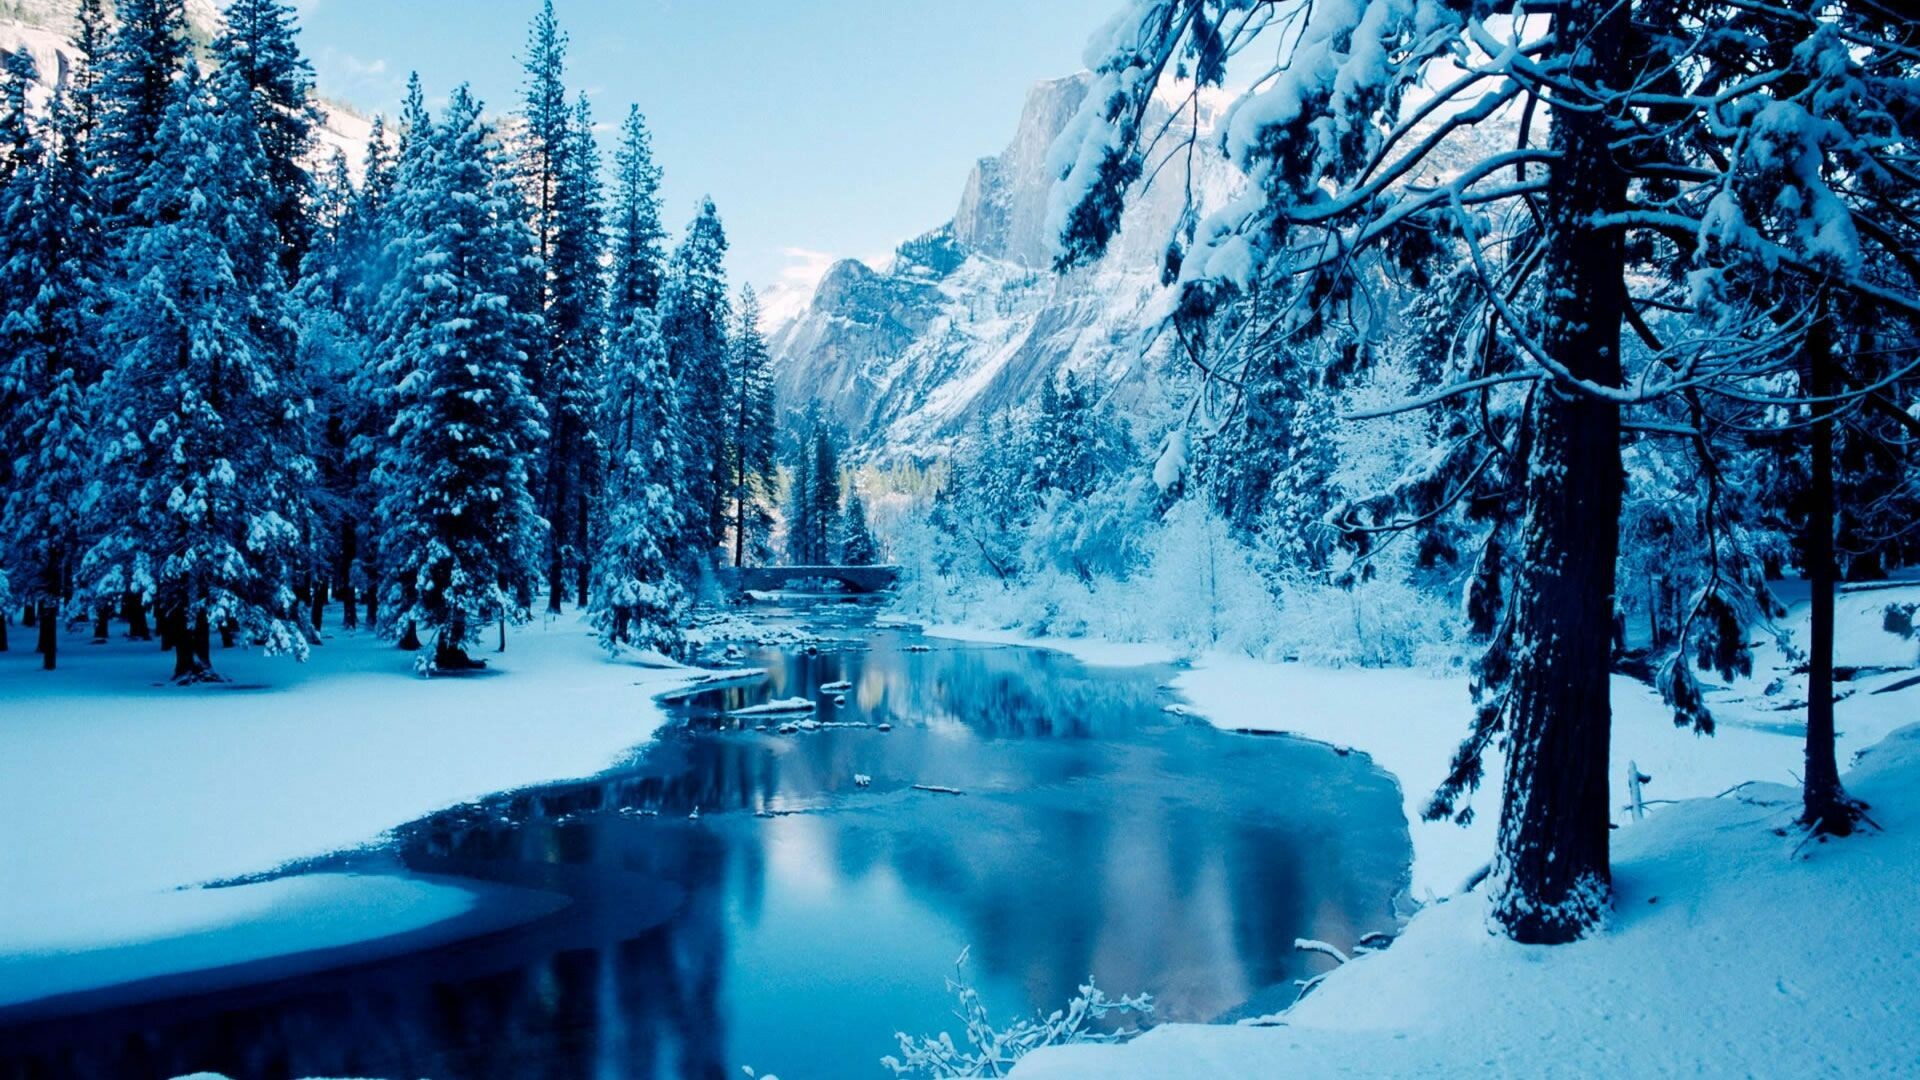 Winter Nature Wallpaper: HD, 4K, 5K for PC and Mobile. Download free image for iPhone, Android